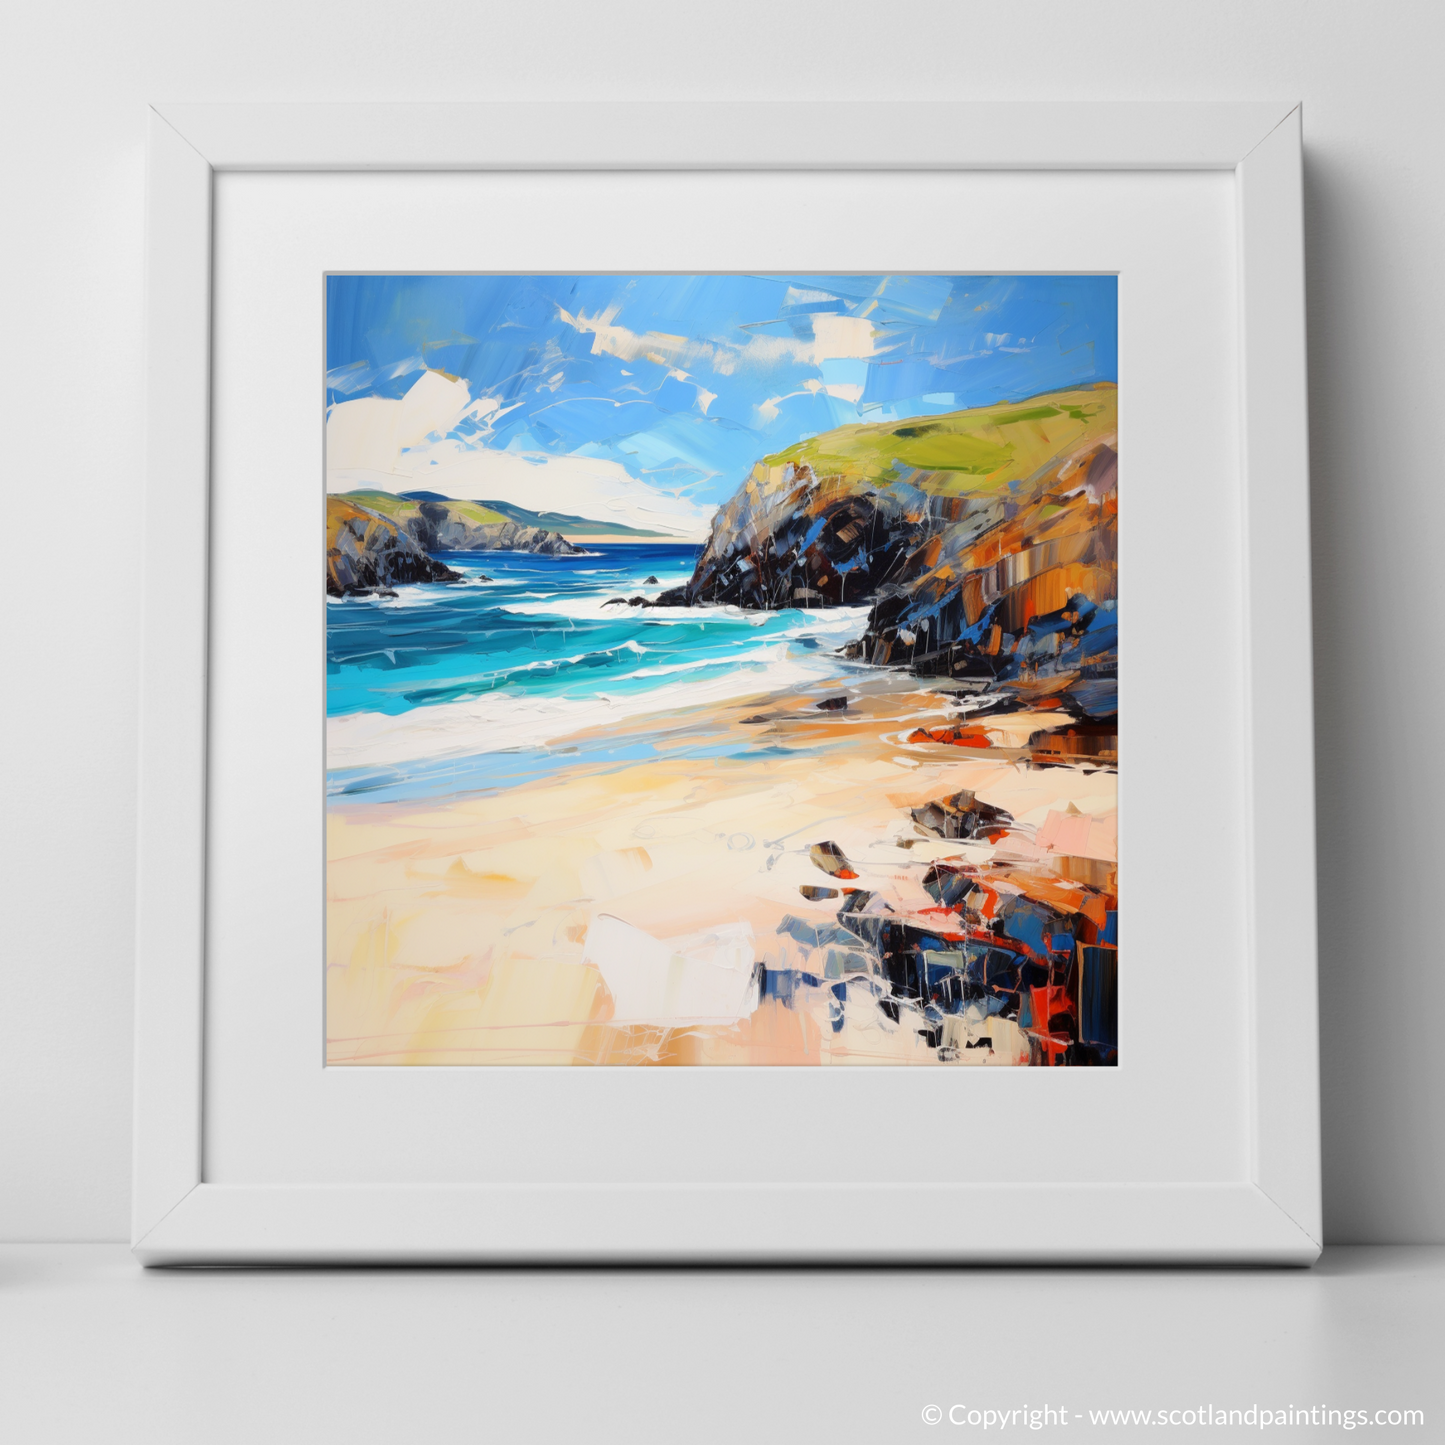 Art Print of Durness Beach, Sutherland with a white frame